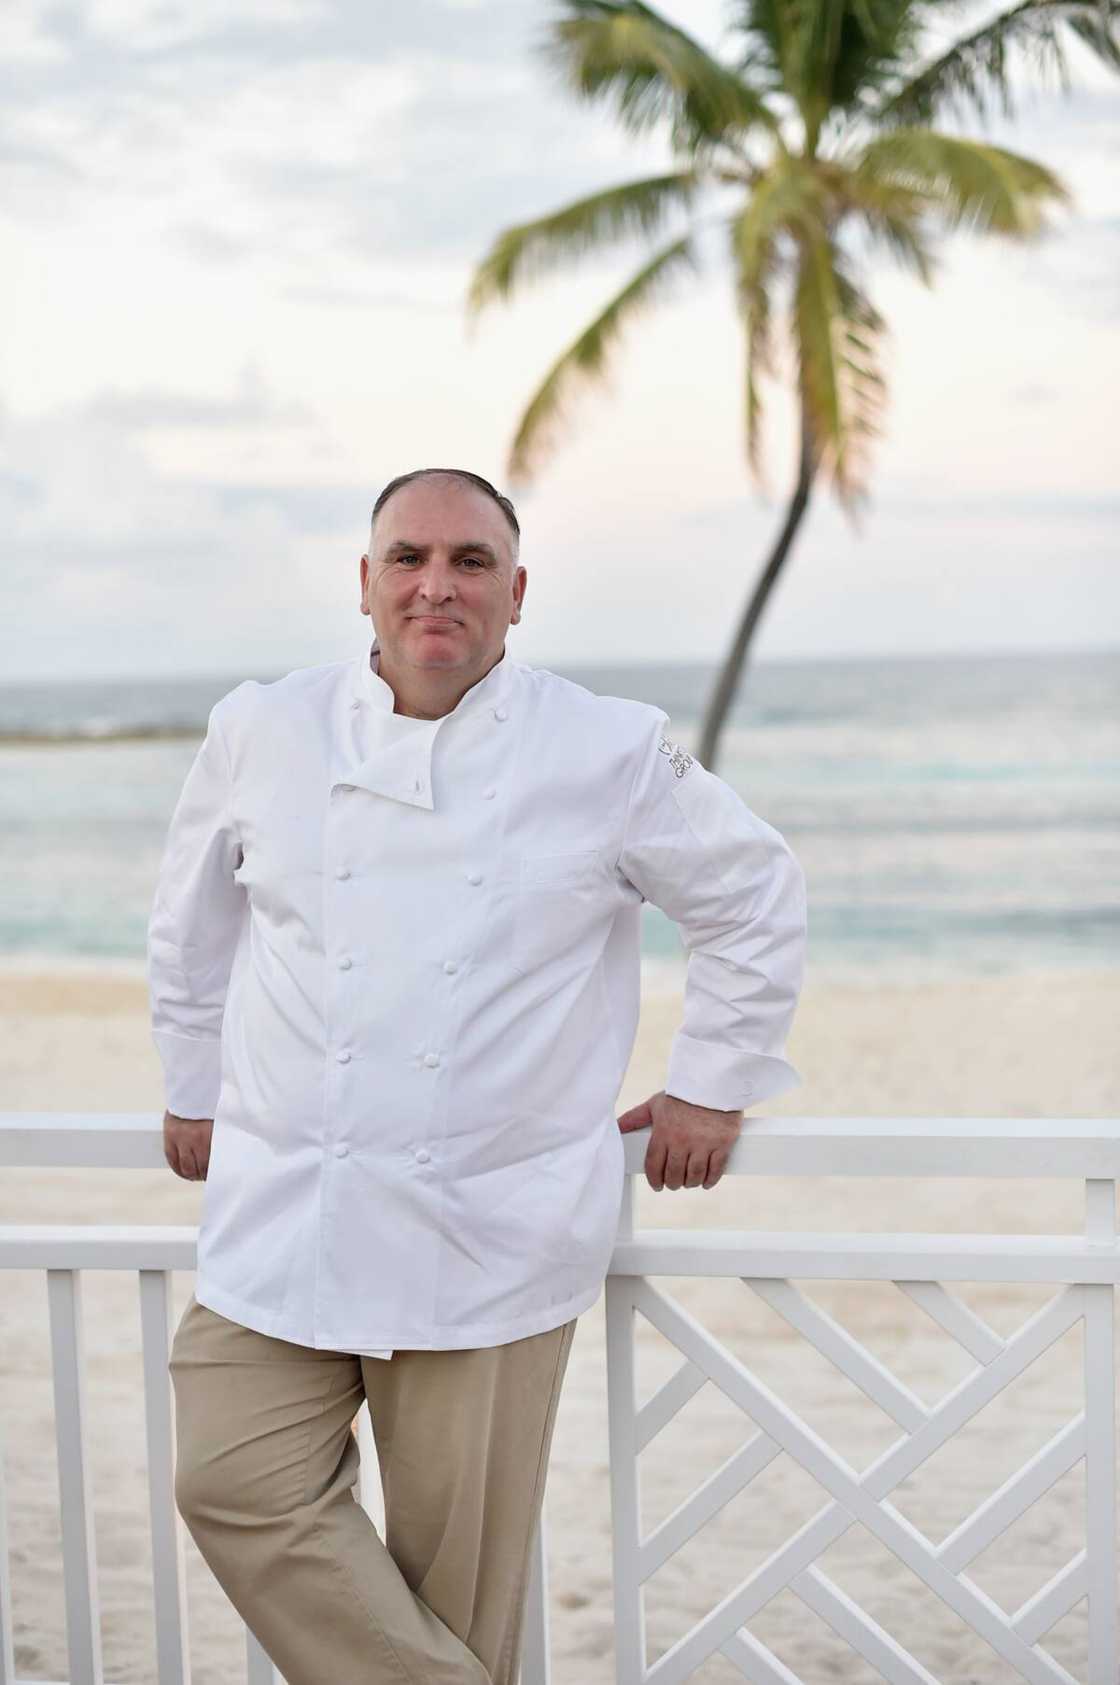 Who is the #1 chef in the world?